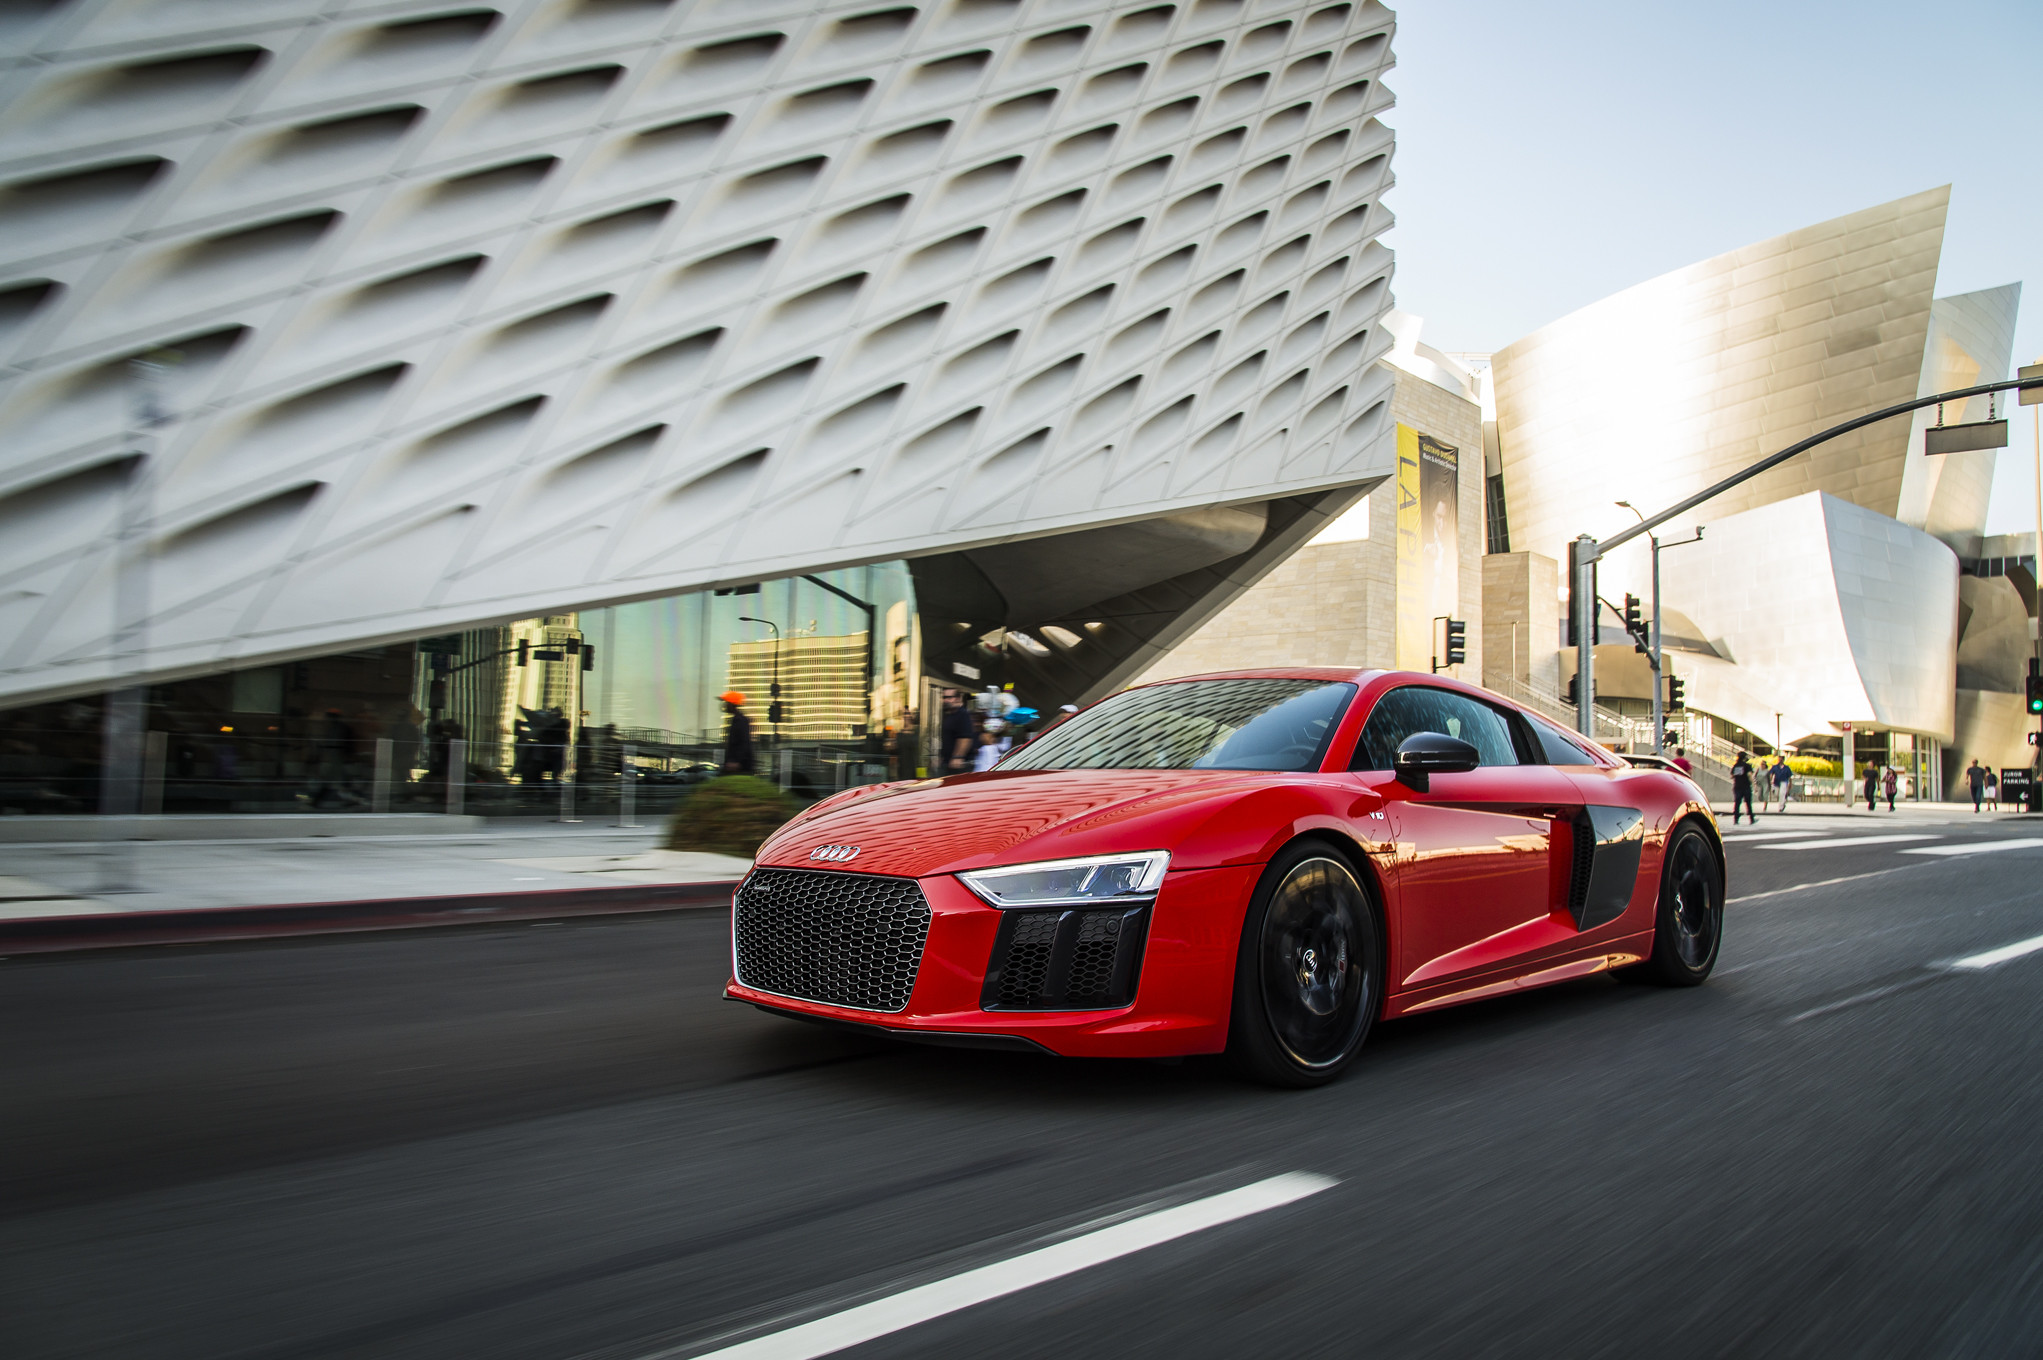 2043x1360 2017 Audi R8 V10 Plus Becomes First Audi to Offer Laser Lights in the US